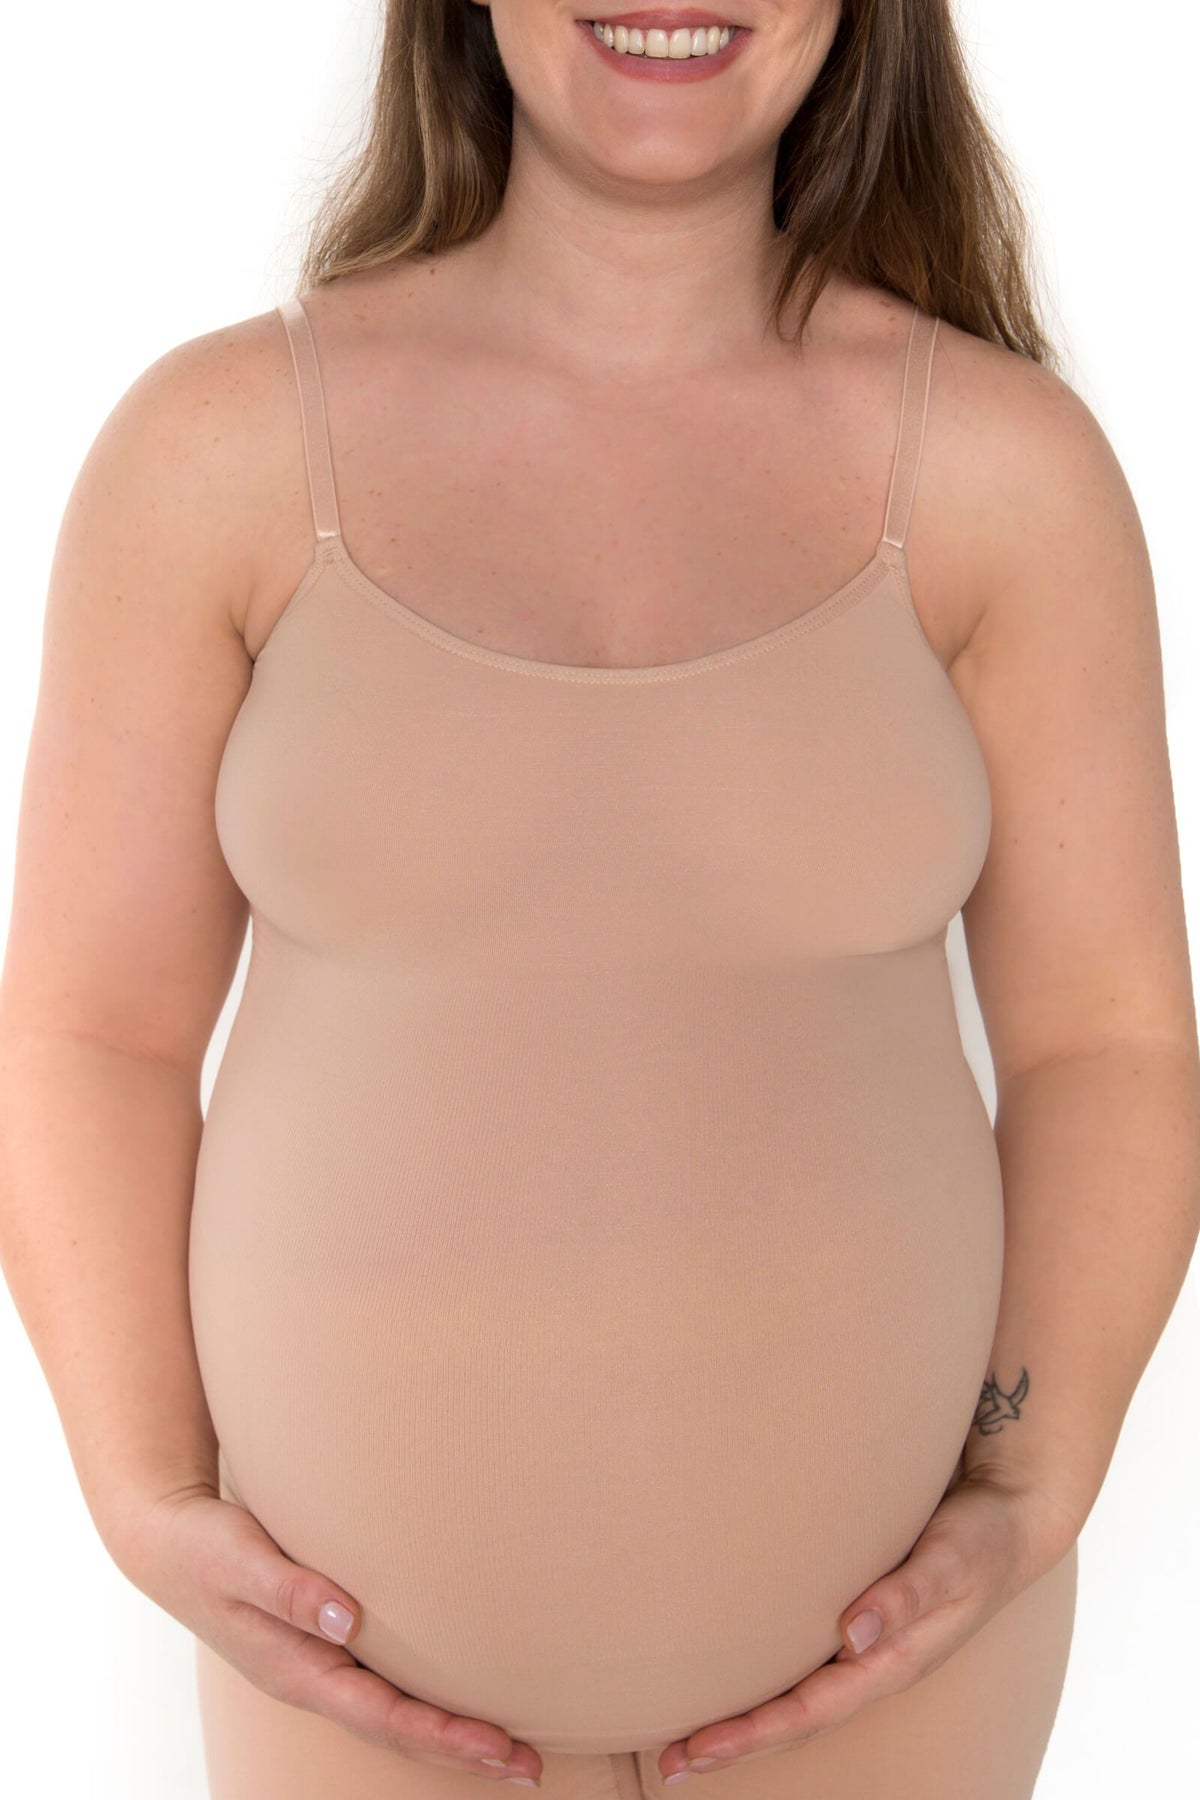 Maternity Shaping Camisole Nude